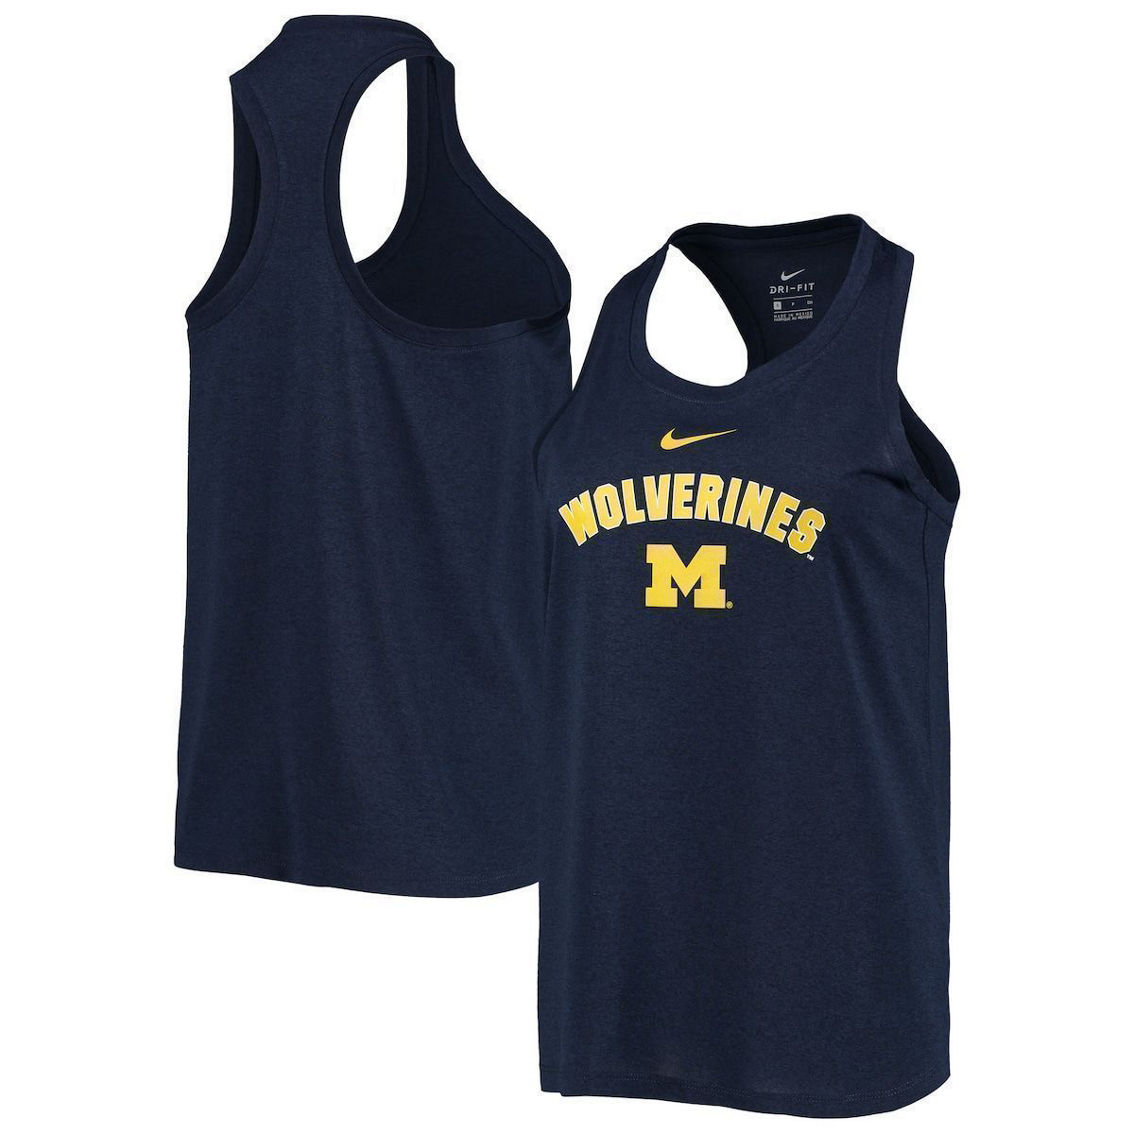 Nike Women's Navy Michigan Wolverines Arch & Logo Classic Performance Tank Top - Image 2 of 4